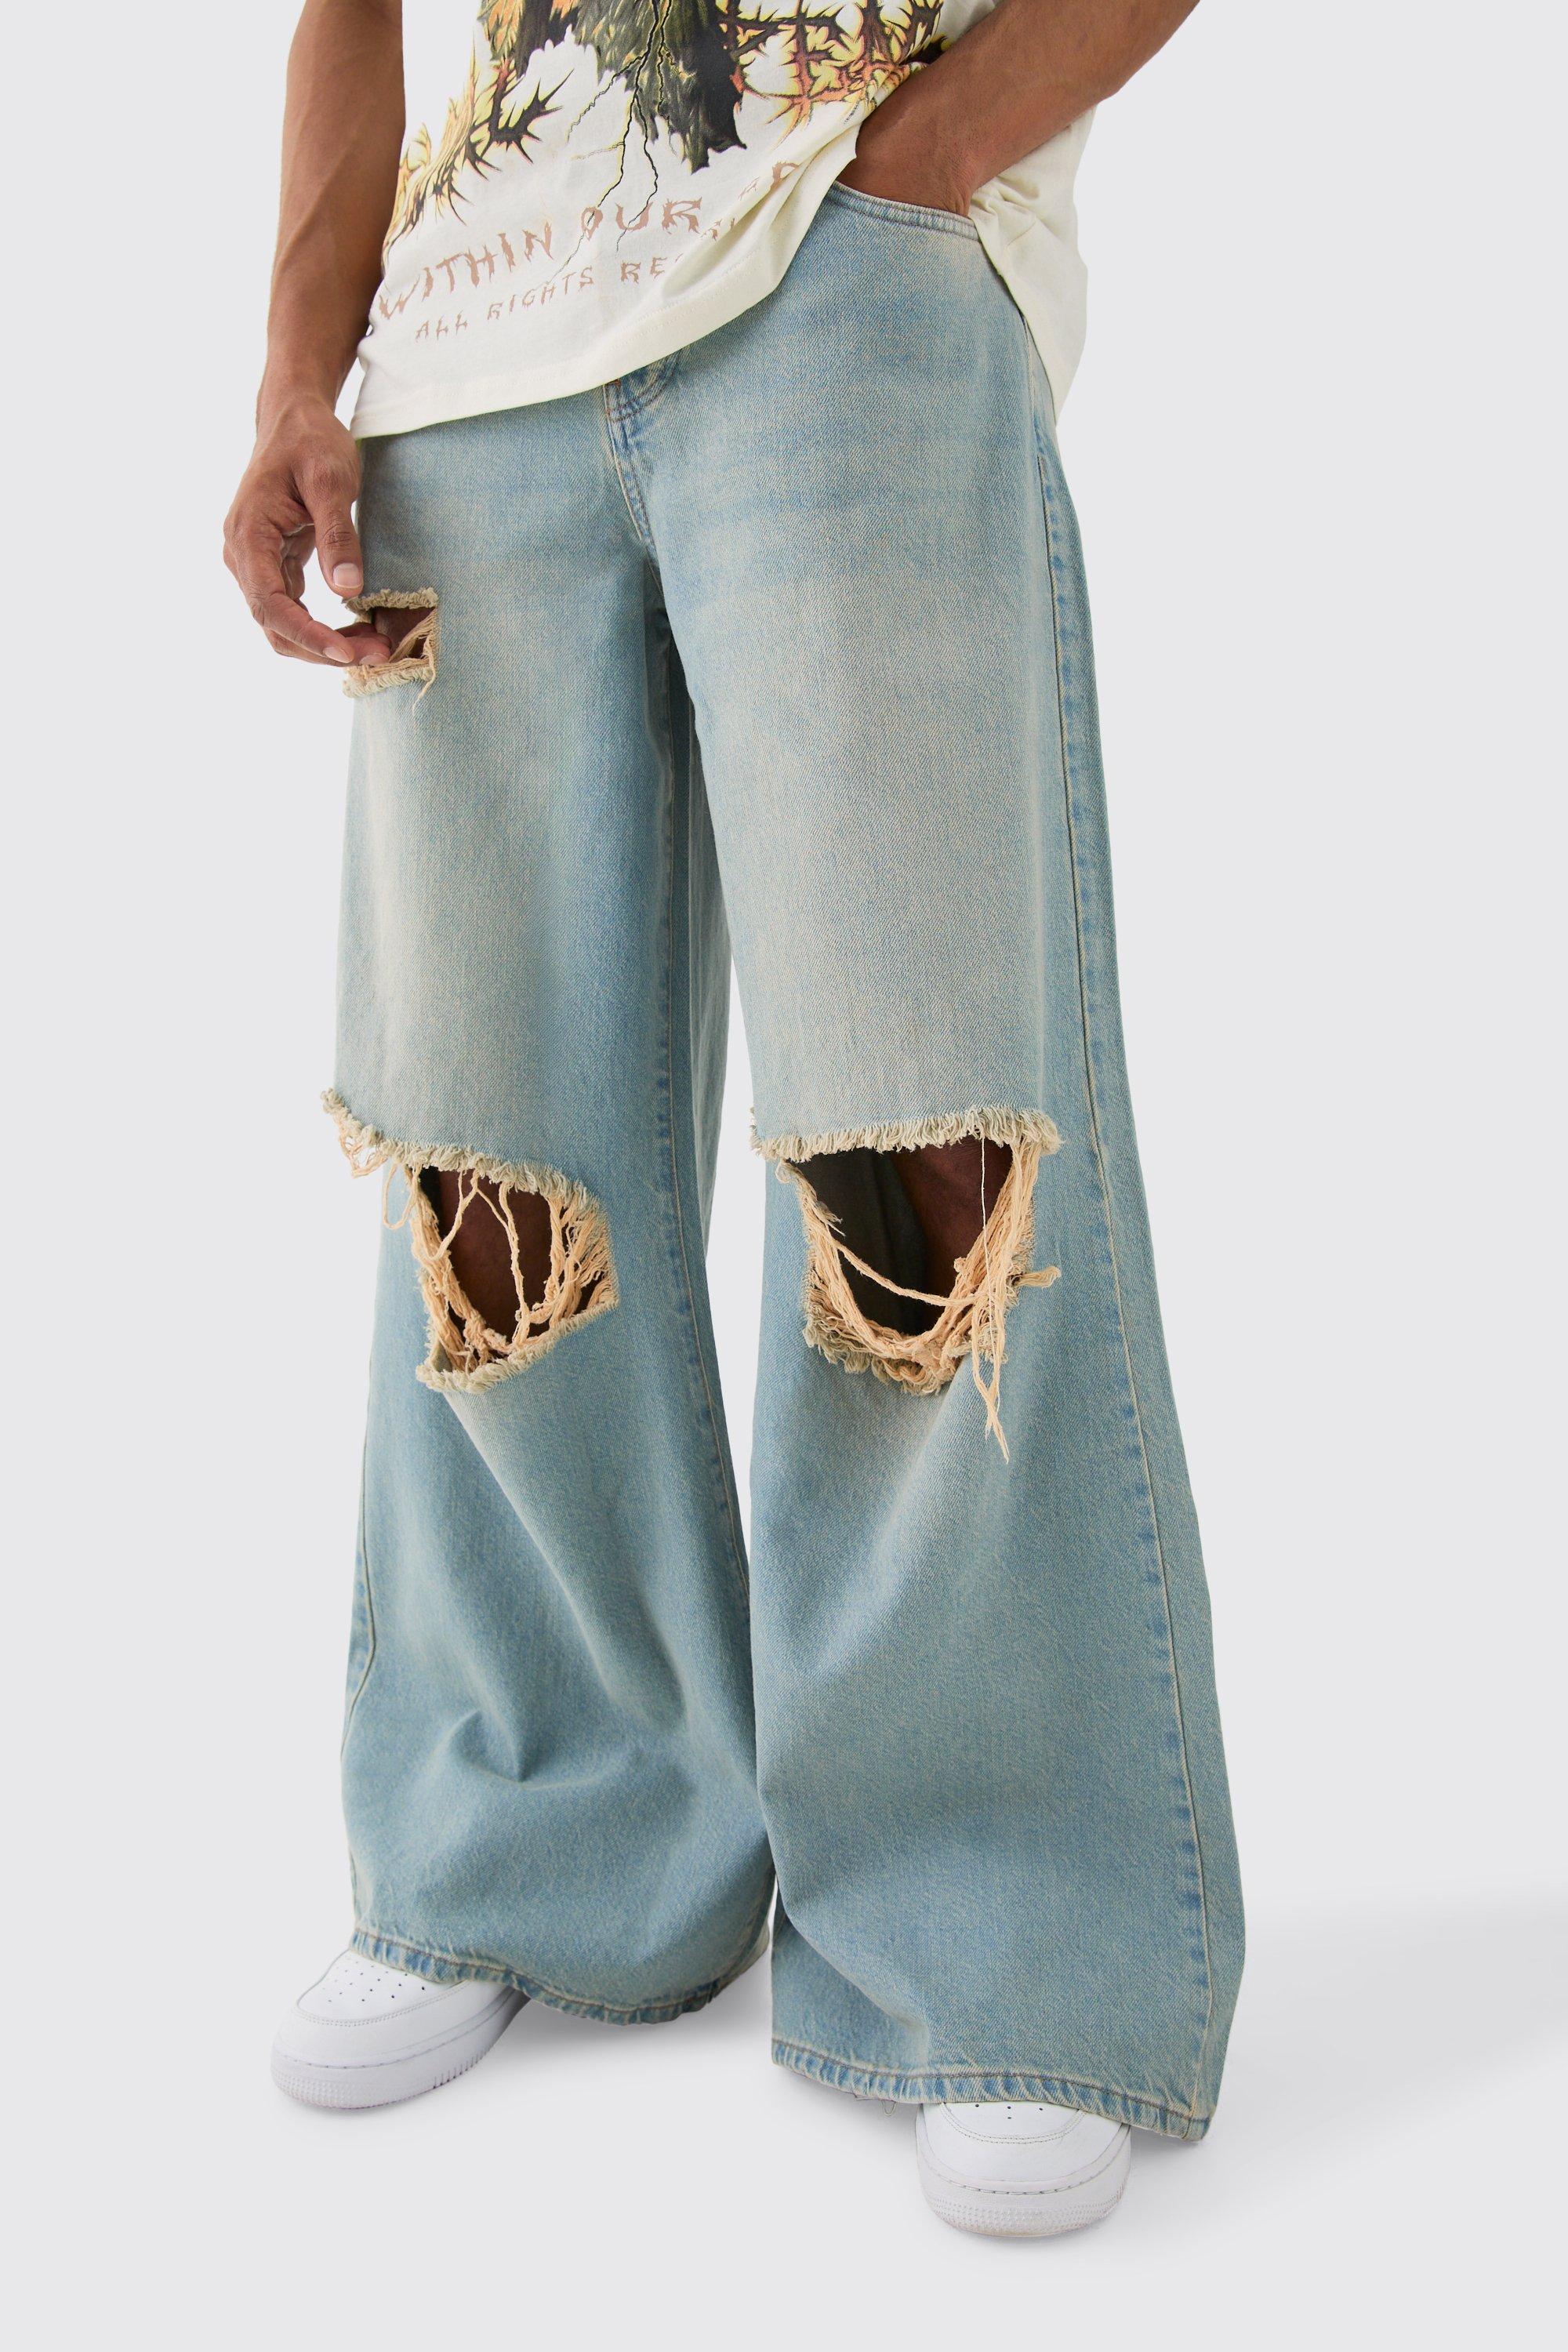 Image of Extreme Baggy Rigid Exploded Knee Rip Denim Jean In Light Blue, Azzurro